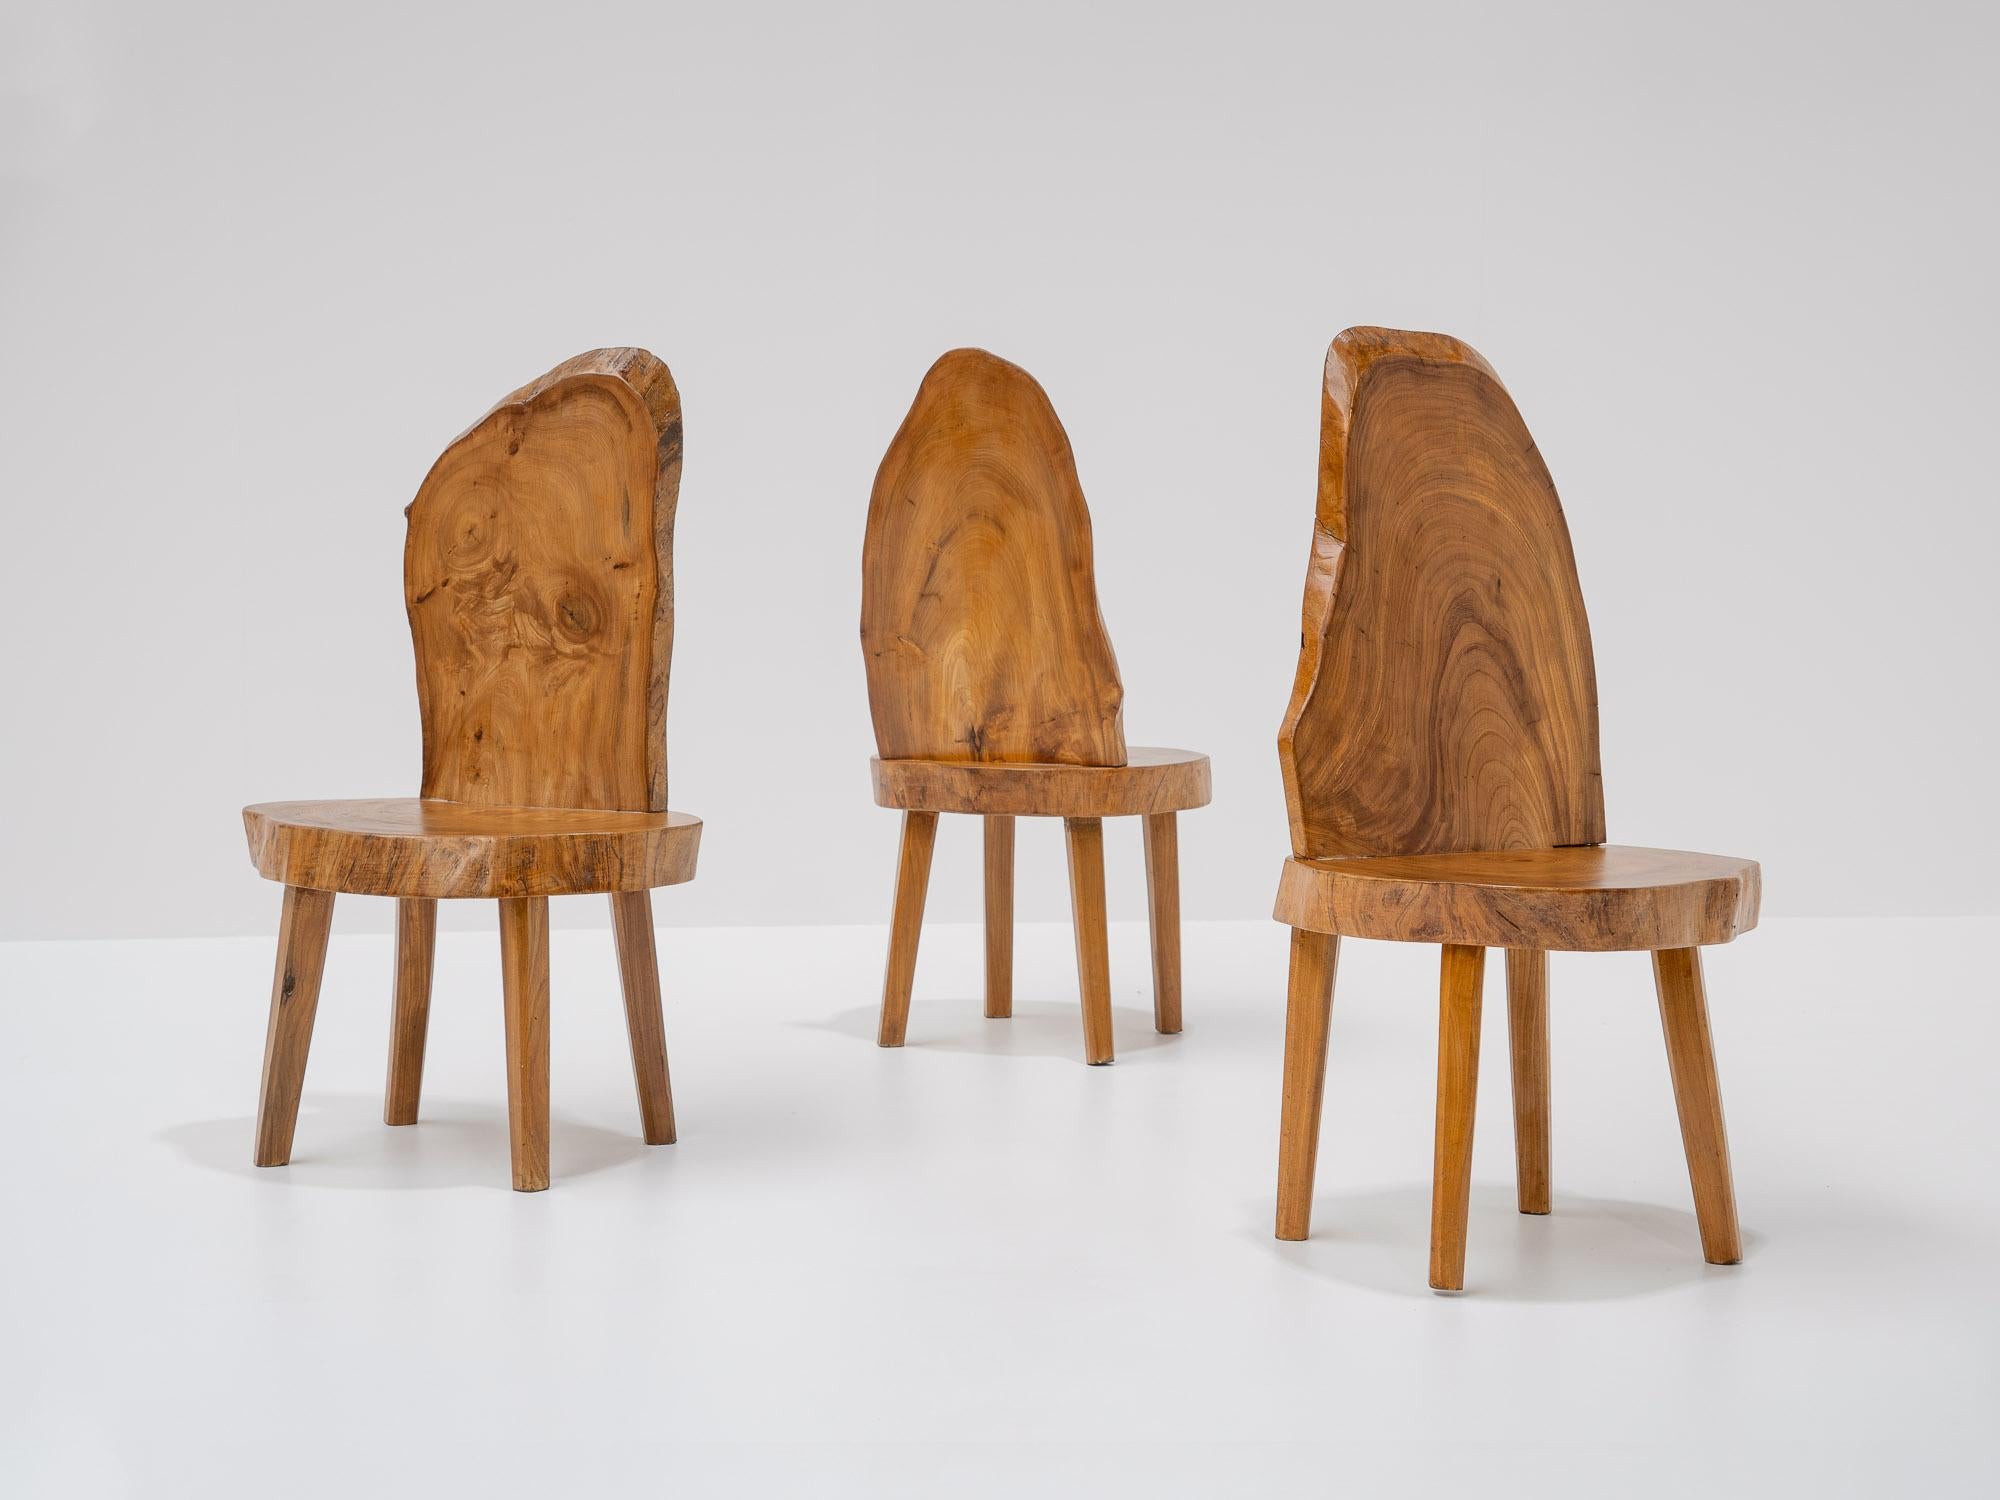 Carved Wooden Tree Trunk Chairs, France, 1980s For Sale 5